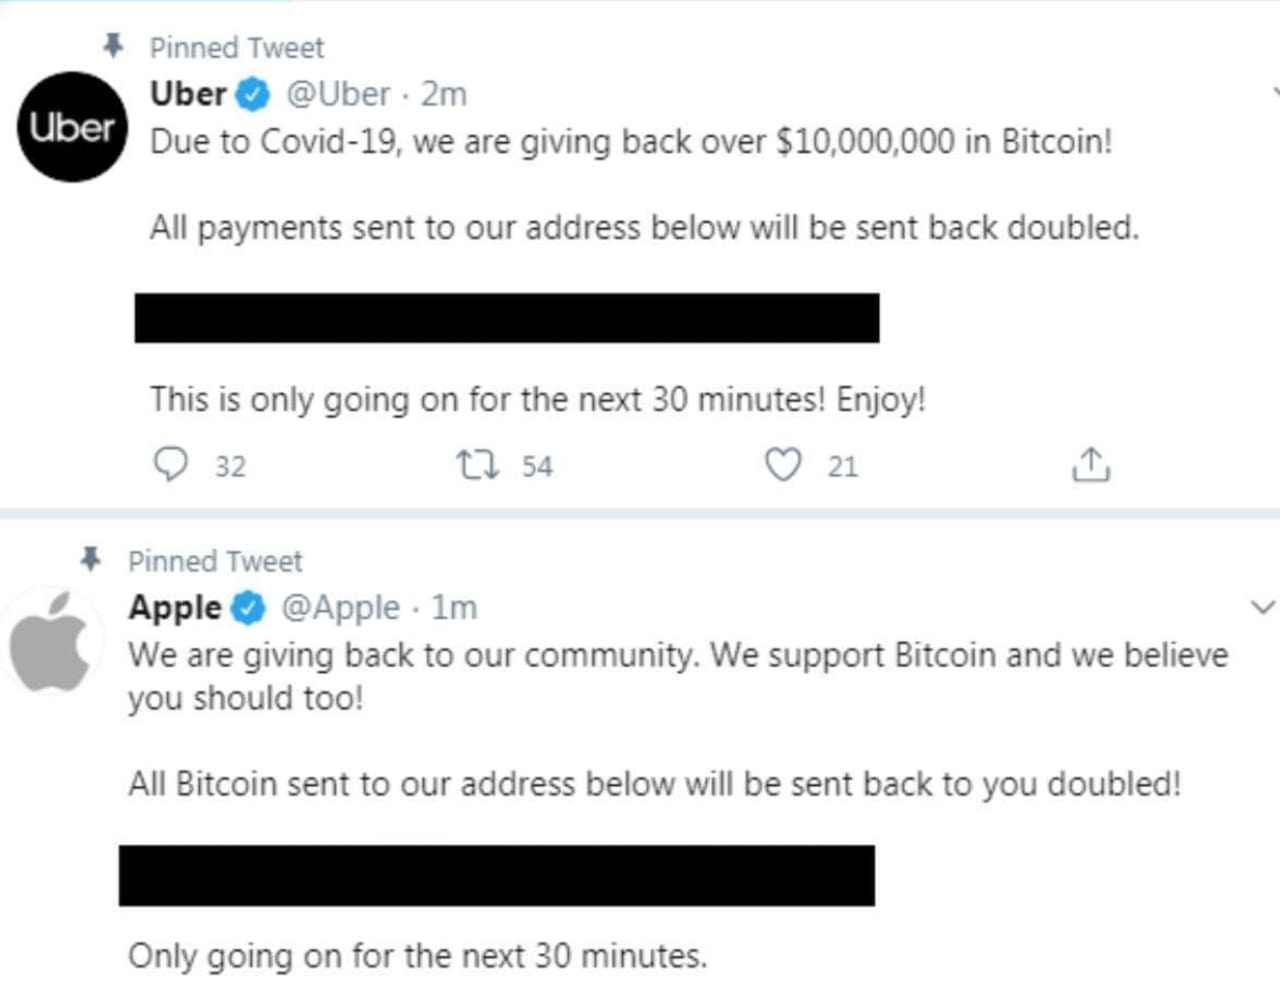 Apple and Uber twitter accounts hackd